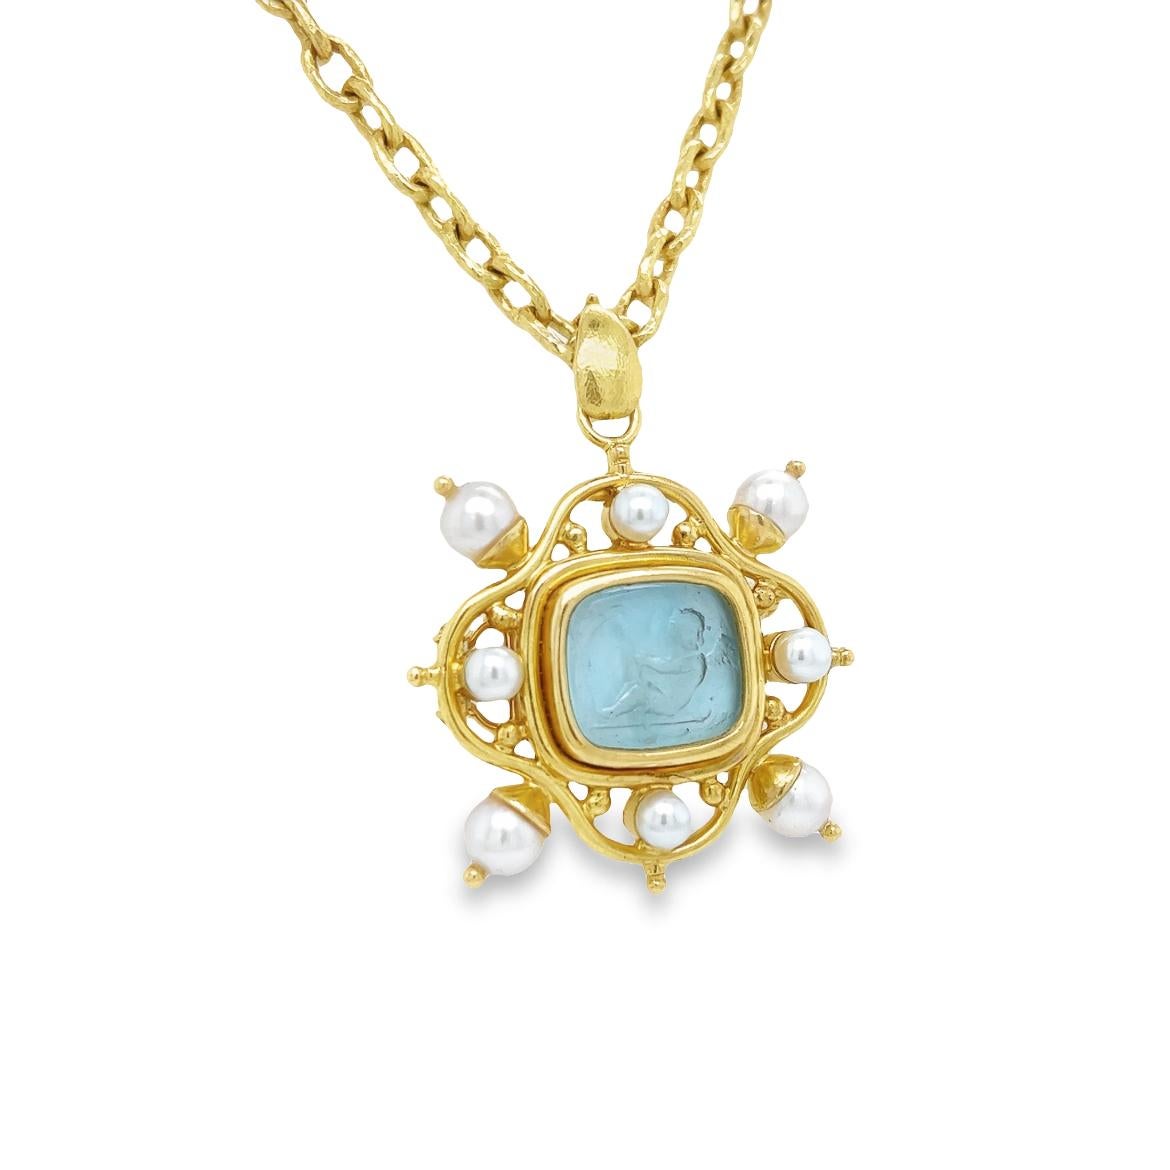 Beautiful necklace crafted by famed designer Elizabeth Locke. This elegant necklace is crafted in 19k yellow gold and features a Venetian glass and Pearl carved intaglio pendant. It is an exquisitely crafted piece of jewelry that seamlessly combines